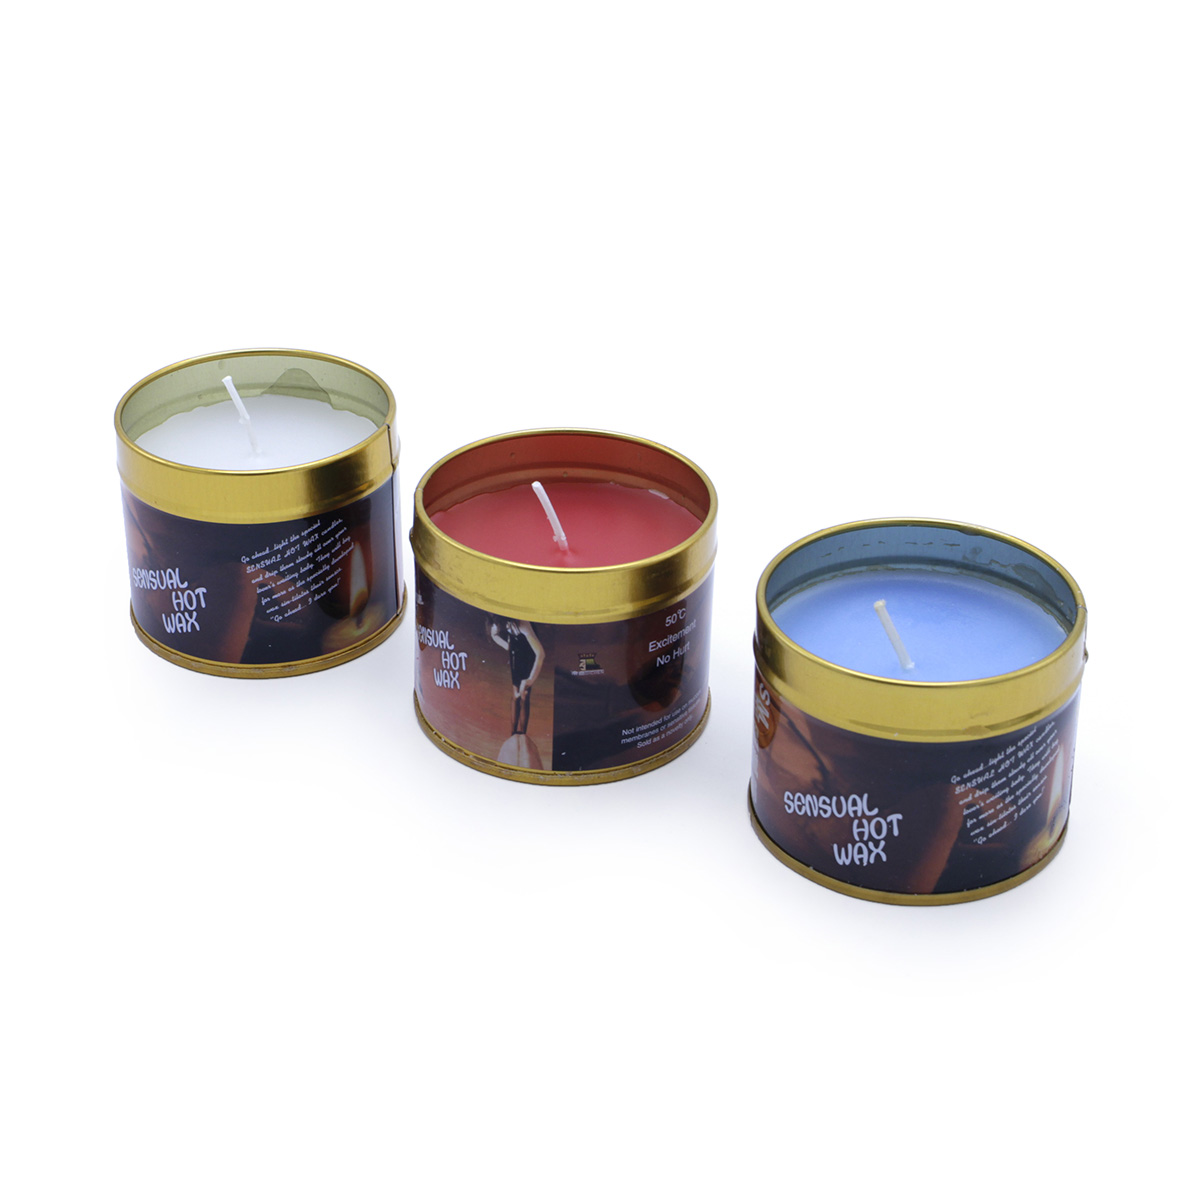 Sensual Hot Wax Candle set White/Red/Blue